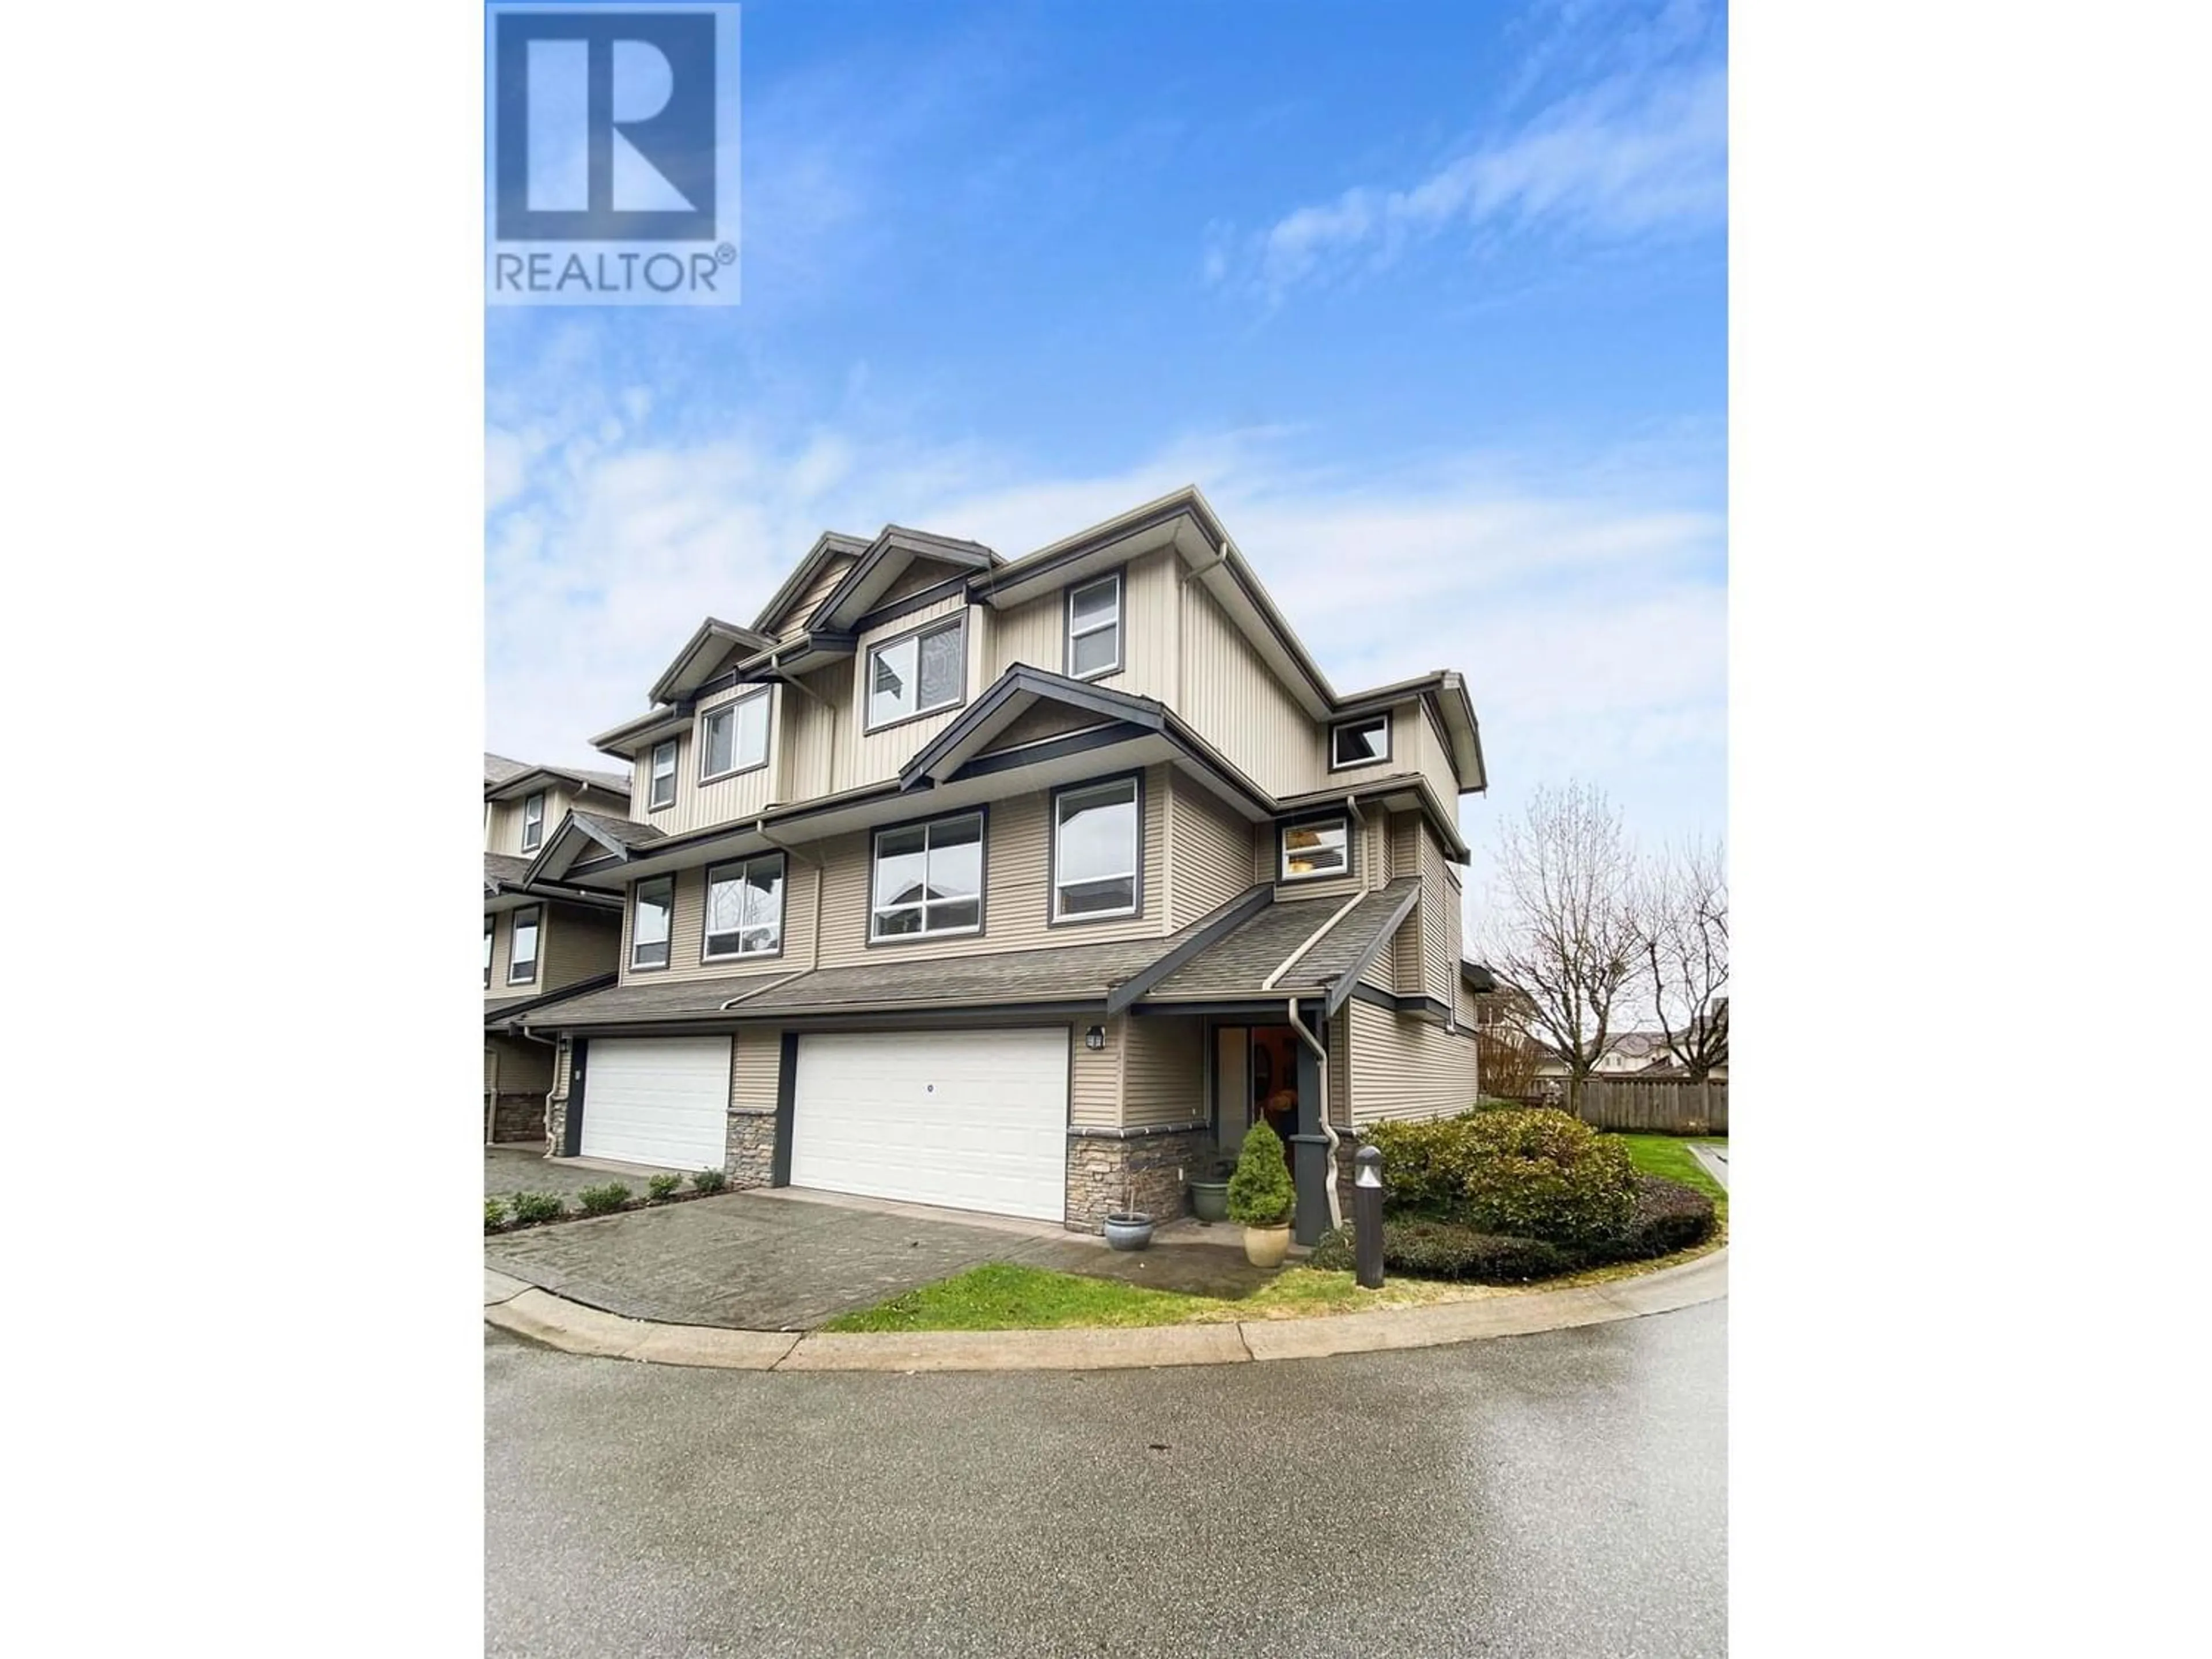 A pic from exterior of the house or condo for 41 3127 SKEENA STREET, Port Coquitlam British Columbia V3B8G5